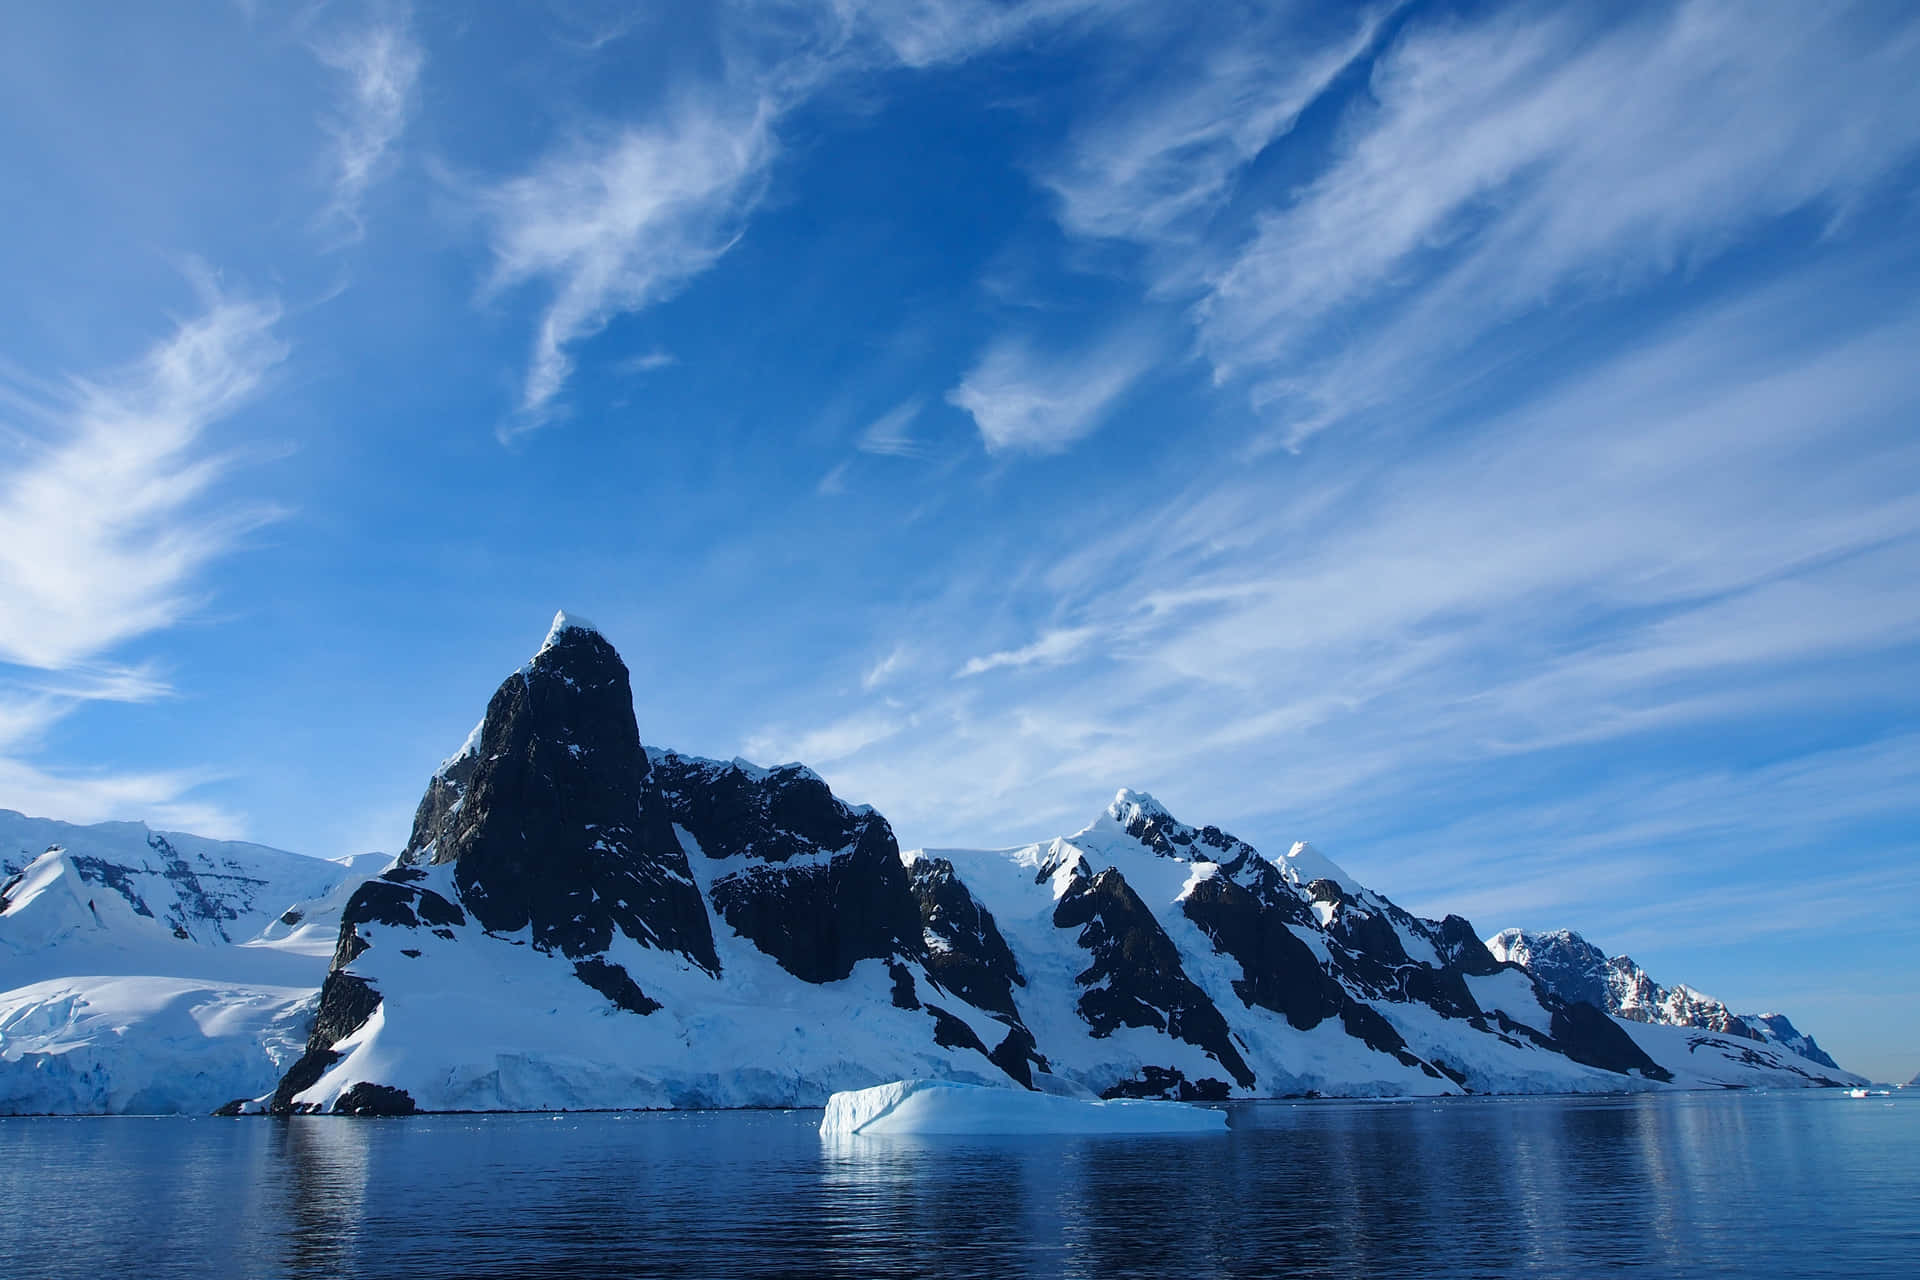 Endless View of the Antarctica Icebergs